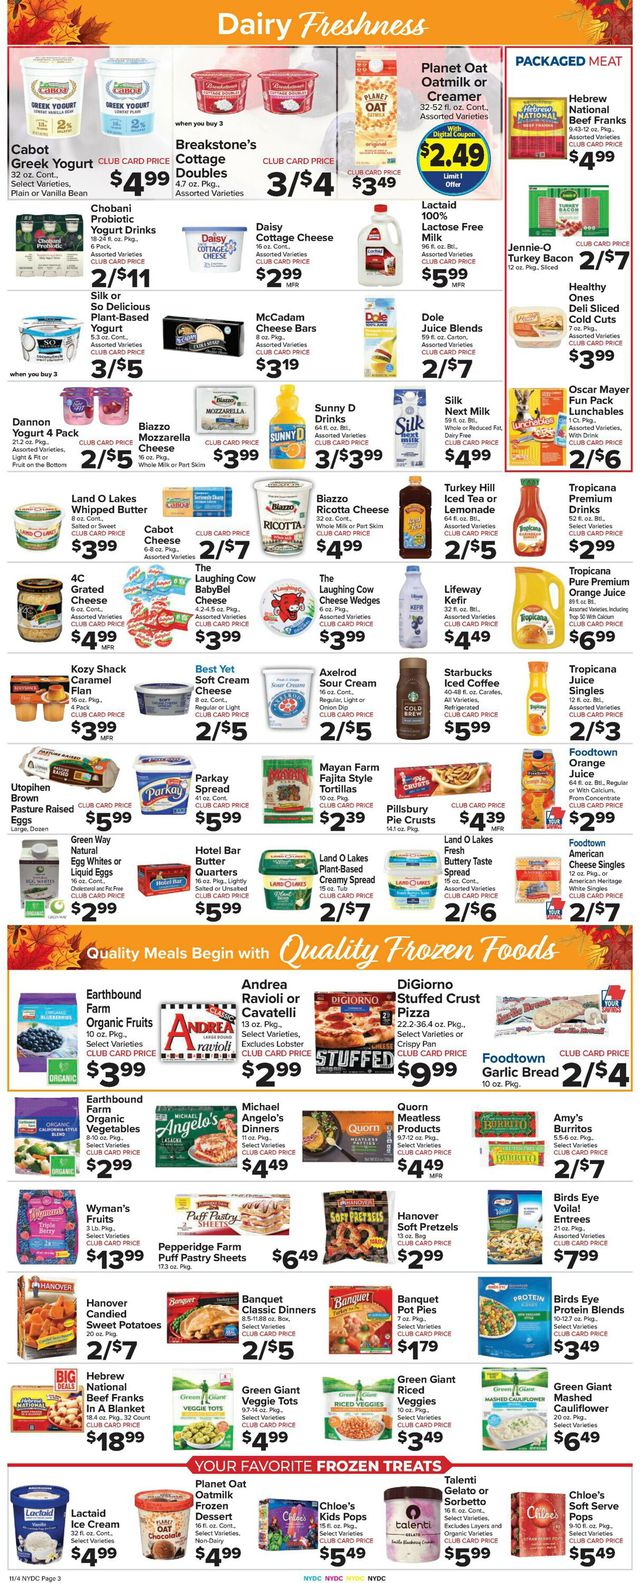 Foodtown Ad from 11/04/2022